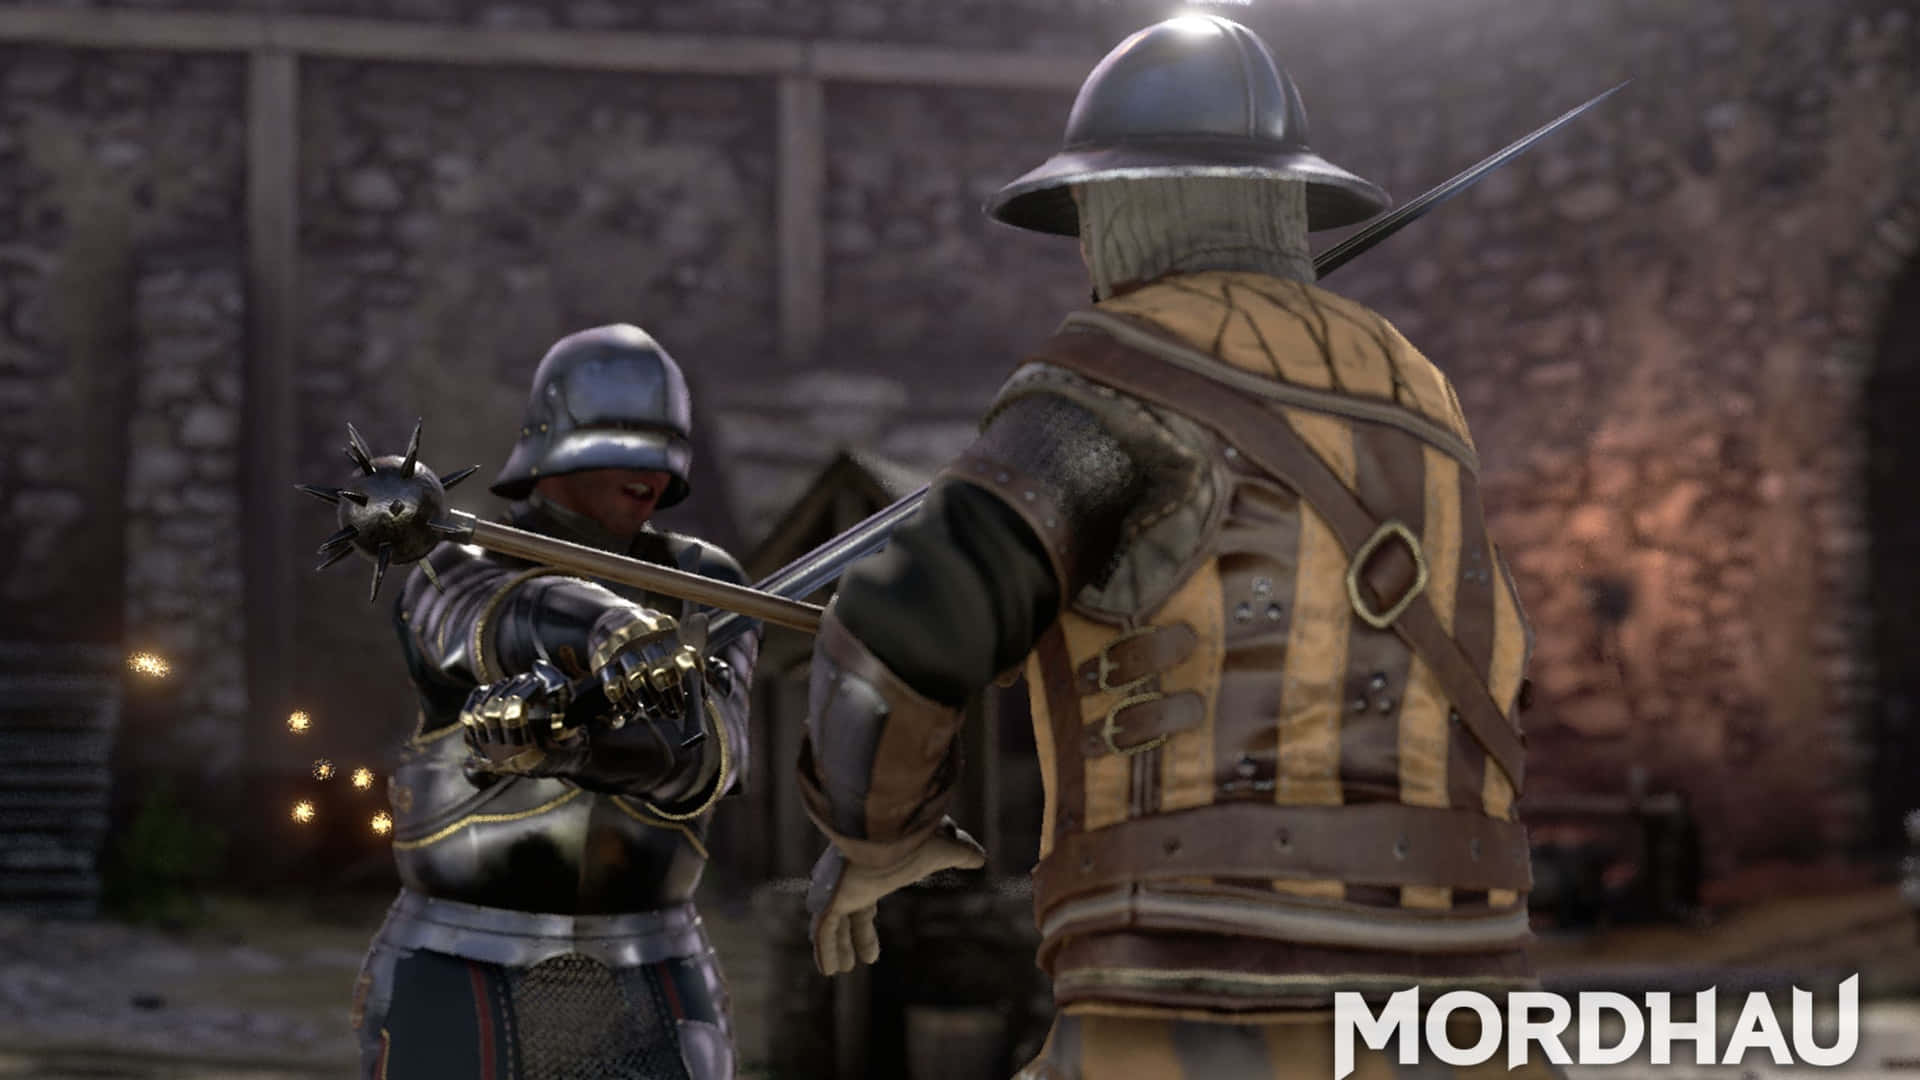 Experience the medieval thrills of Mordhau in stunning 1440p.